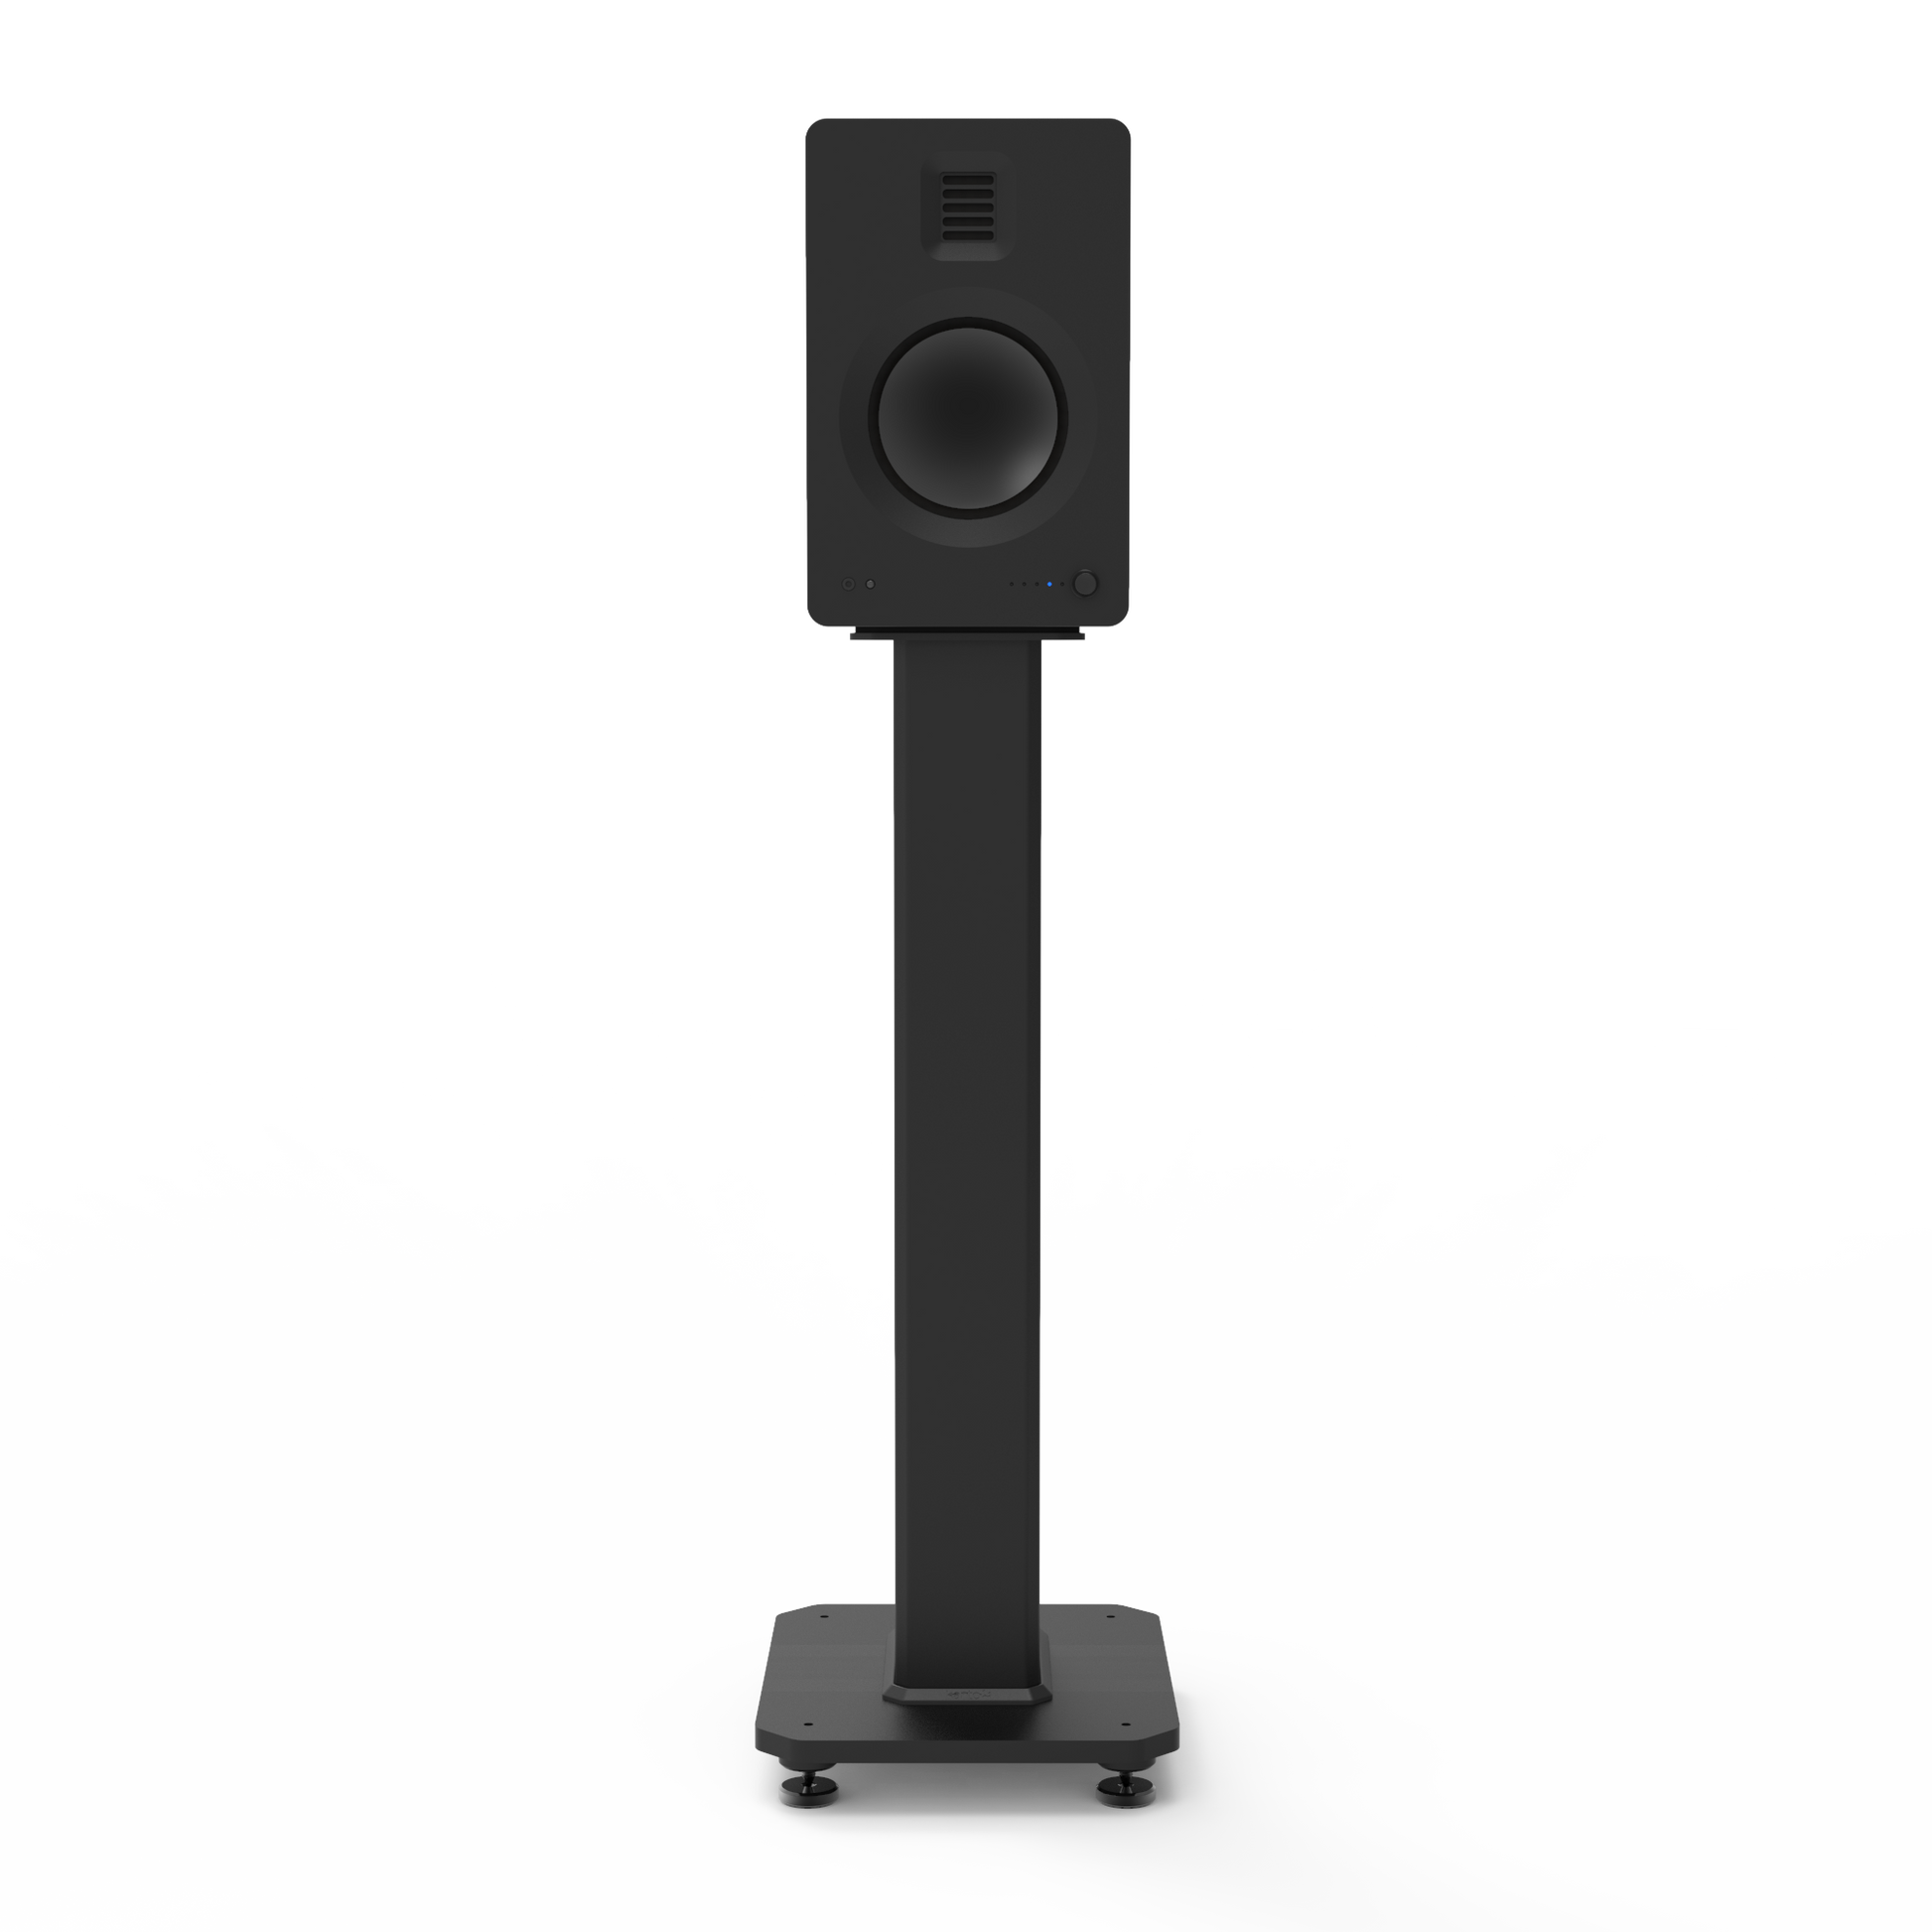 Kanto SX26 26" Tall Fillable Speaker Stands with Isolation Feet - Pair, Black